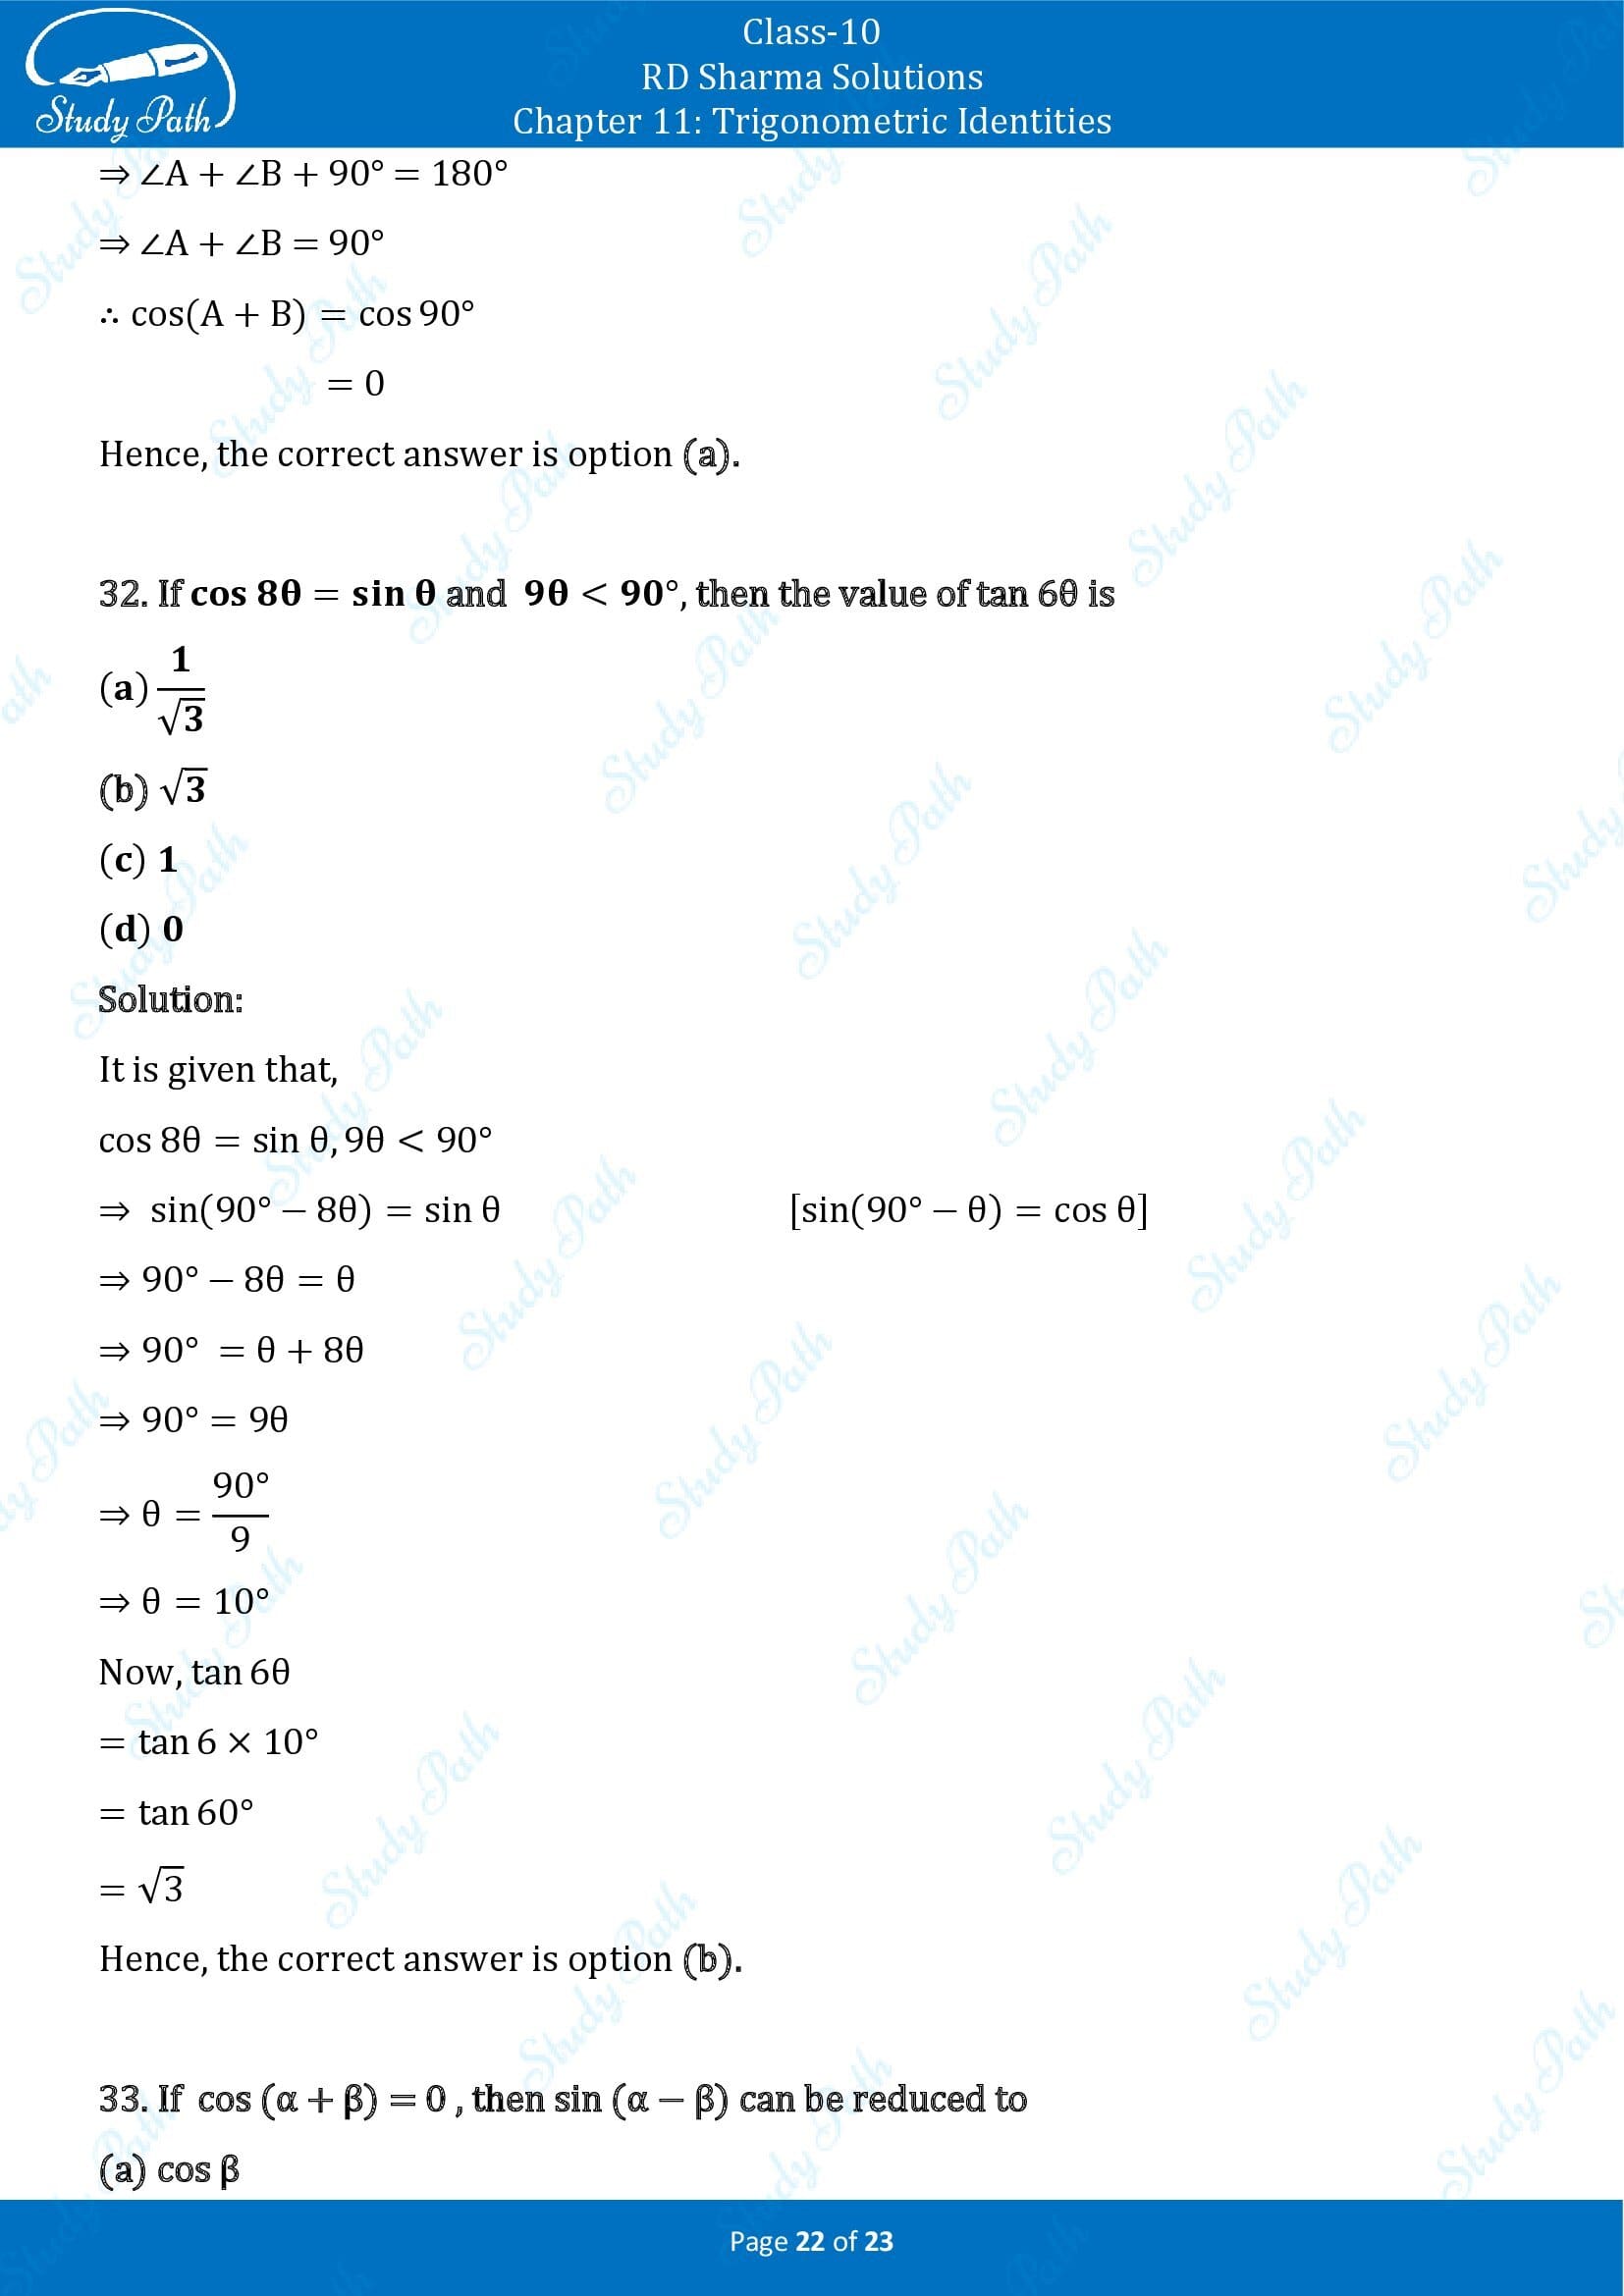 RD Sharma Solutions Class 10 Chapter 11 Trigonometric Identities Multiple Choice Questions MCQs 00022